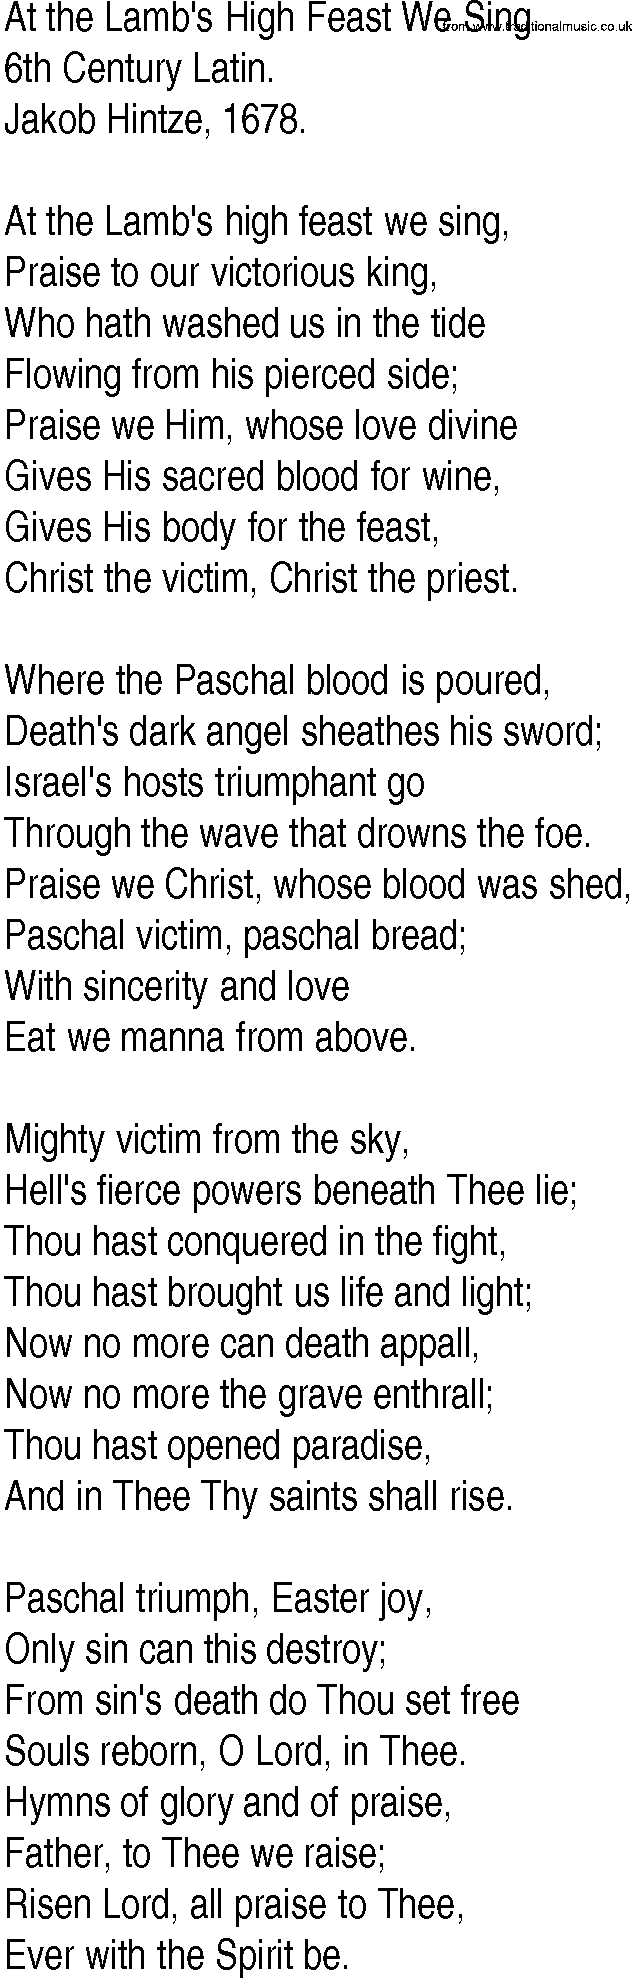 Hymn and Gospel Song: At the Lamb's High Feast We Sing by th Century Latin lyrics